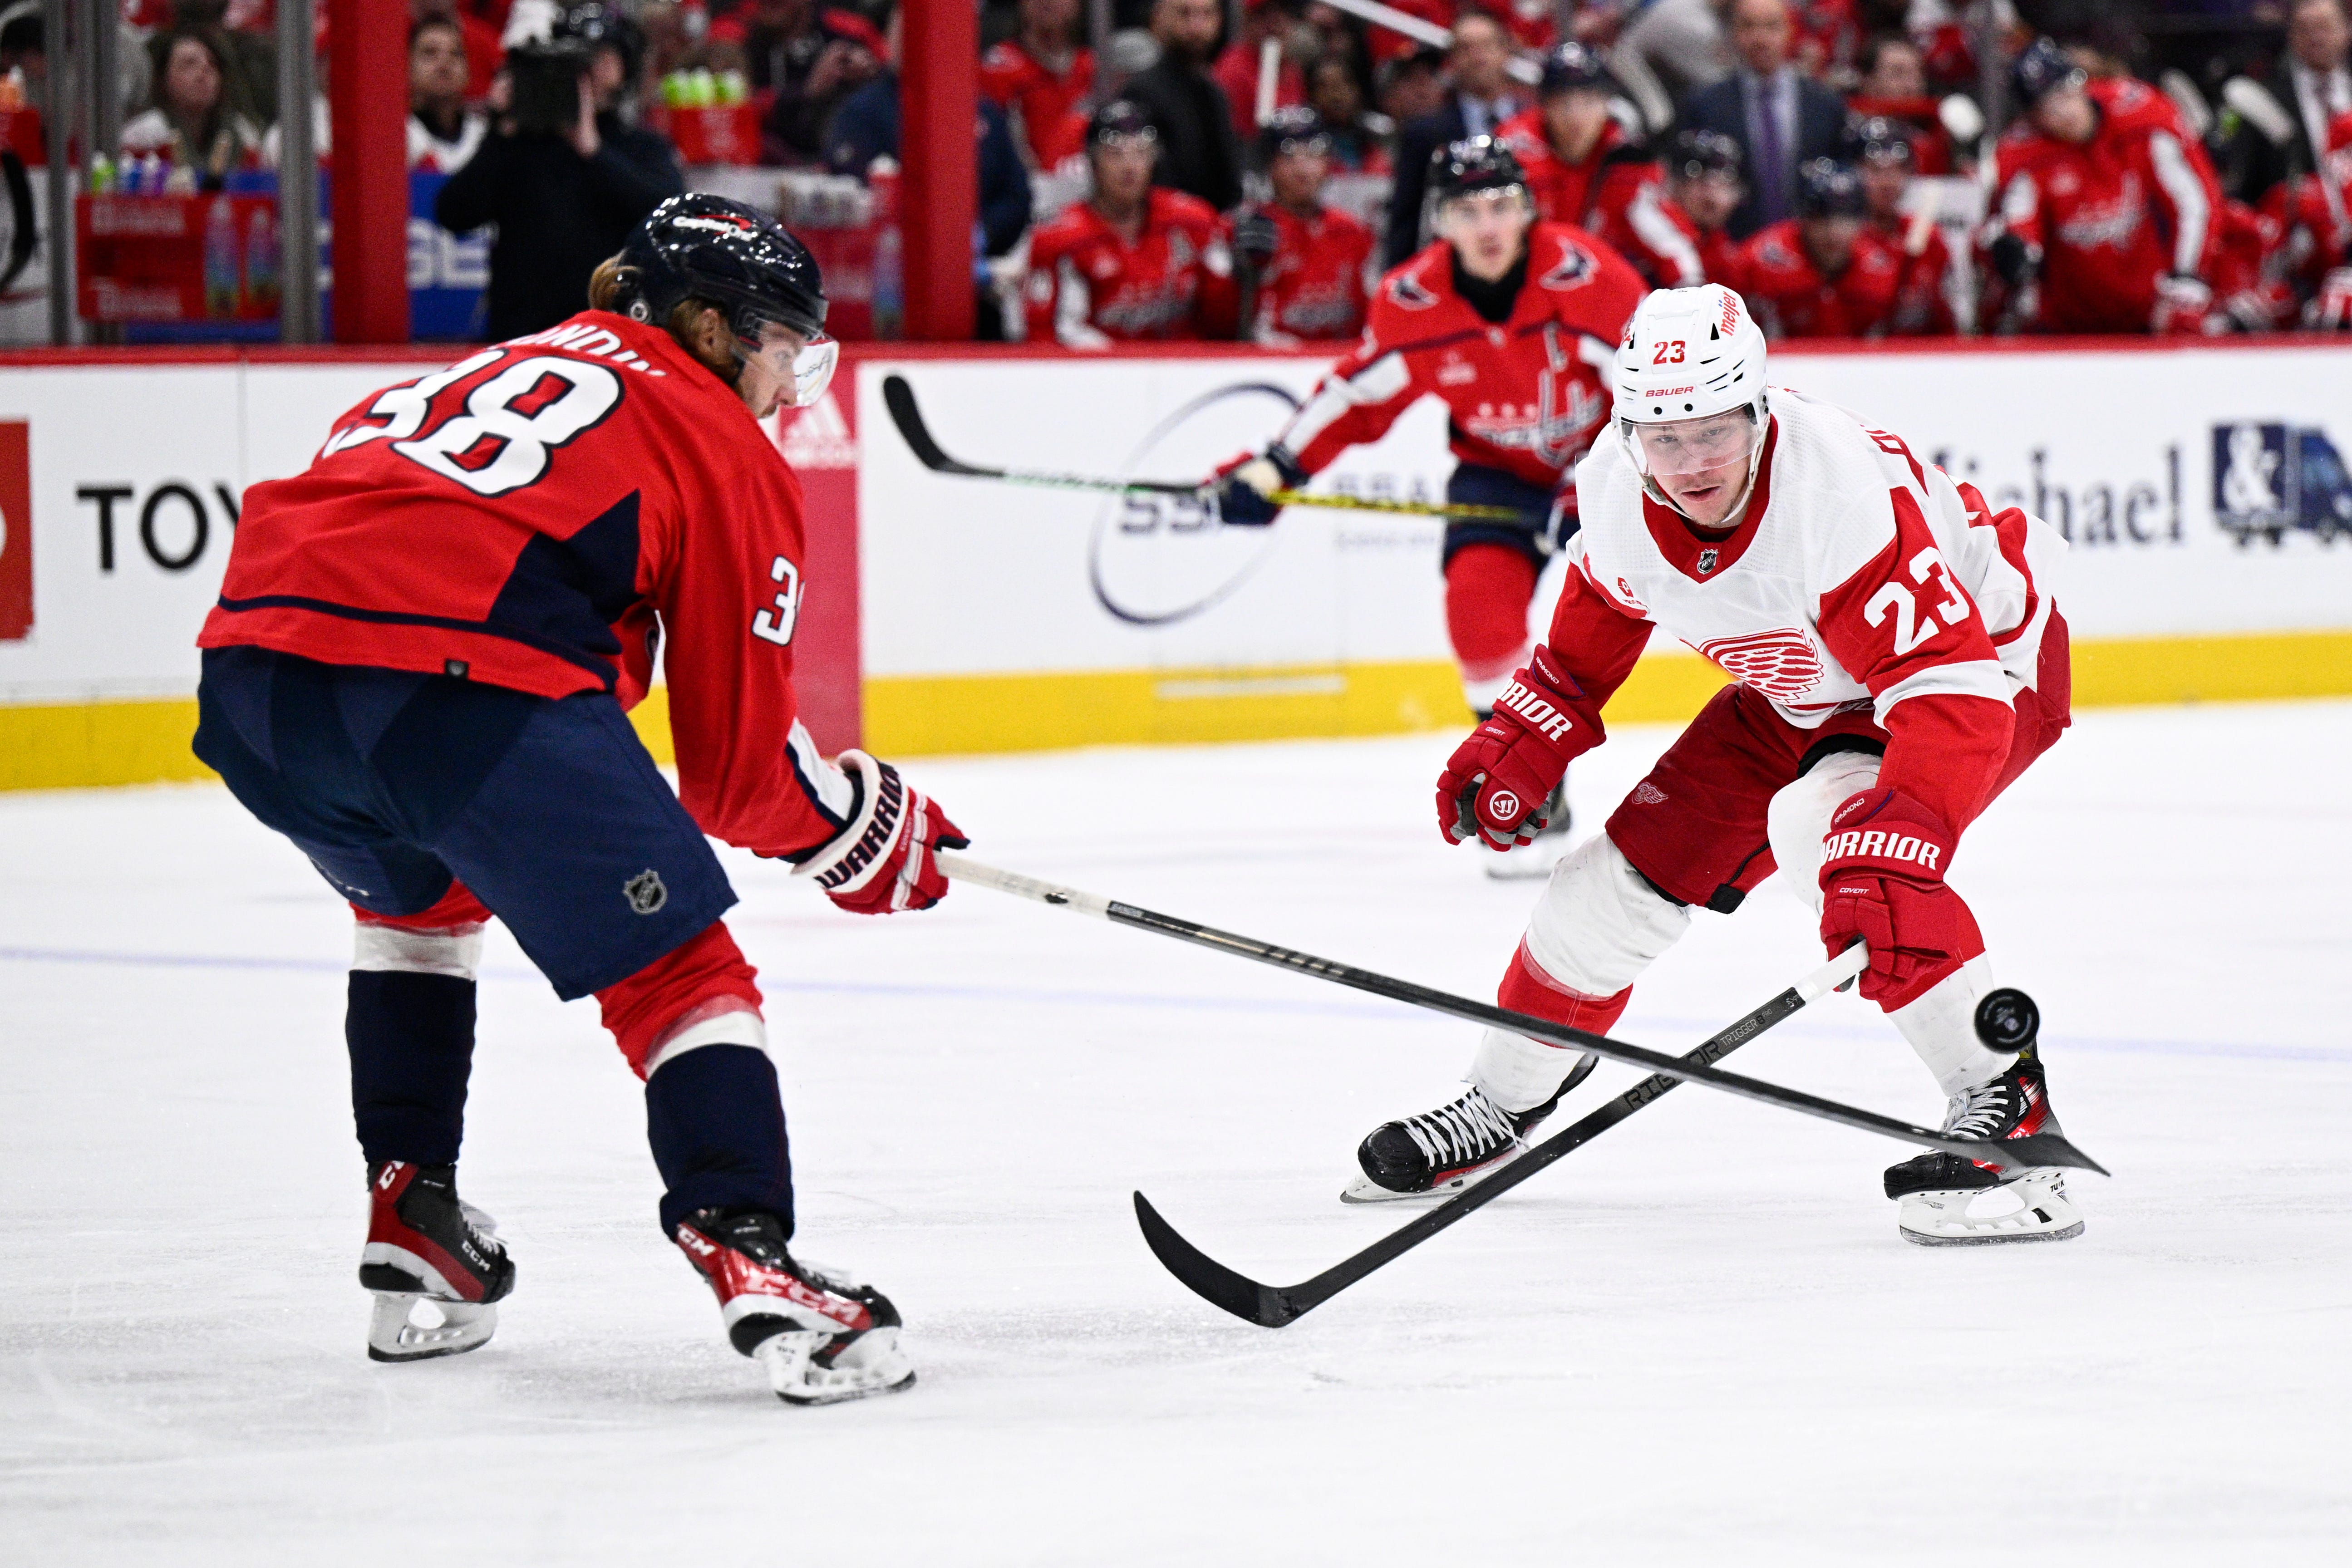 Detroit Red Wings left wing Lucas Raymond (23) battles for the puck against Washington Capitals defenseman Rasmus Sandin (38) during the second period.